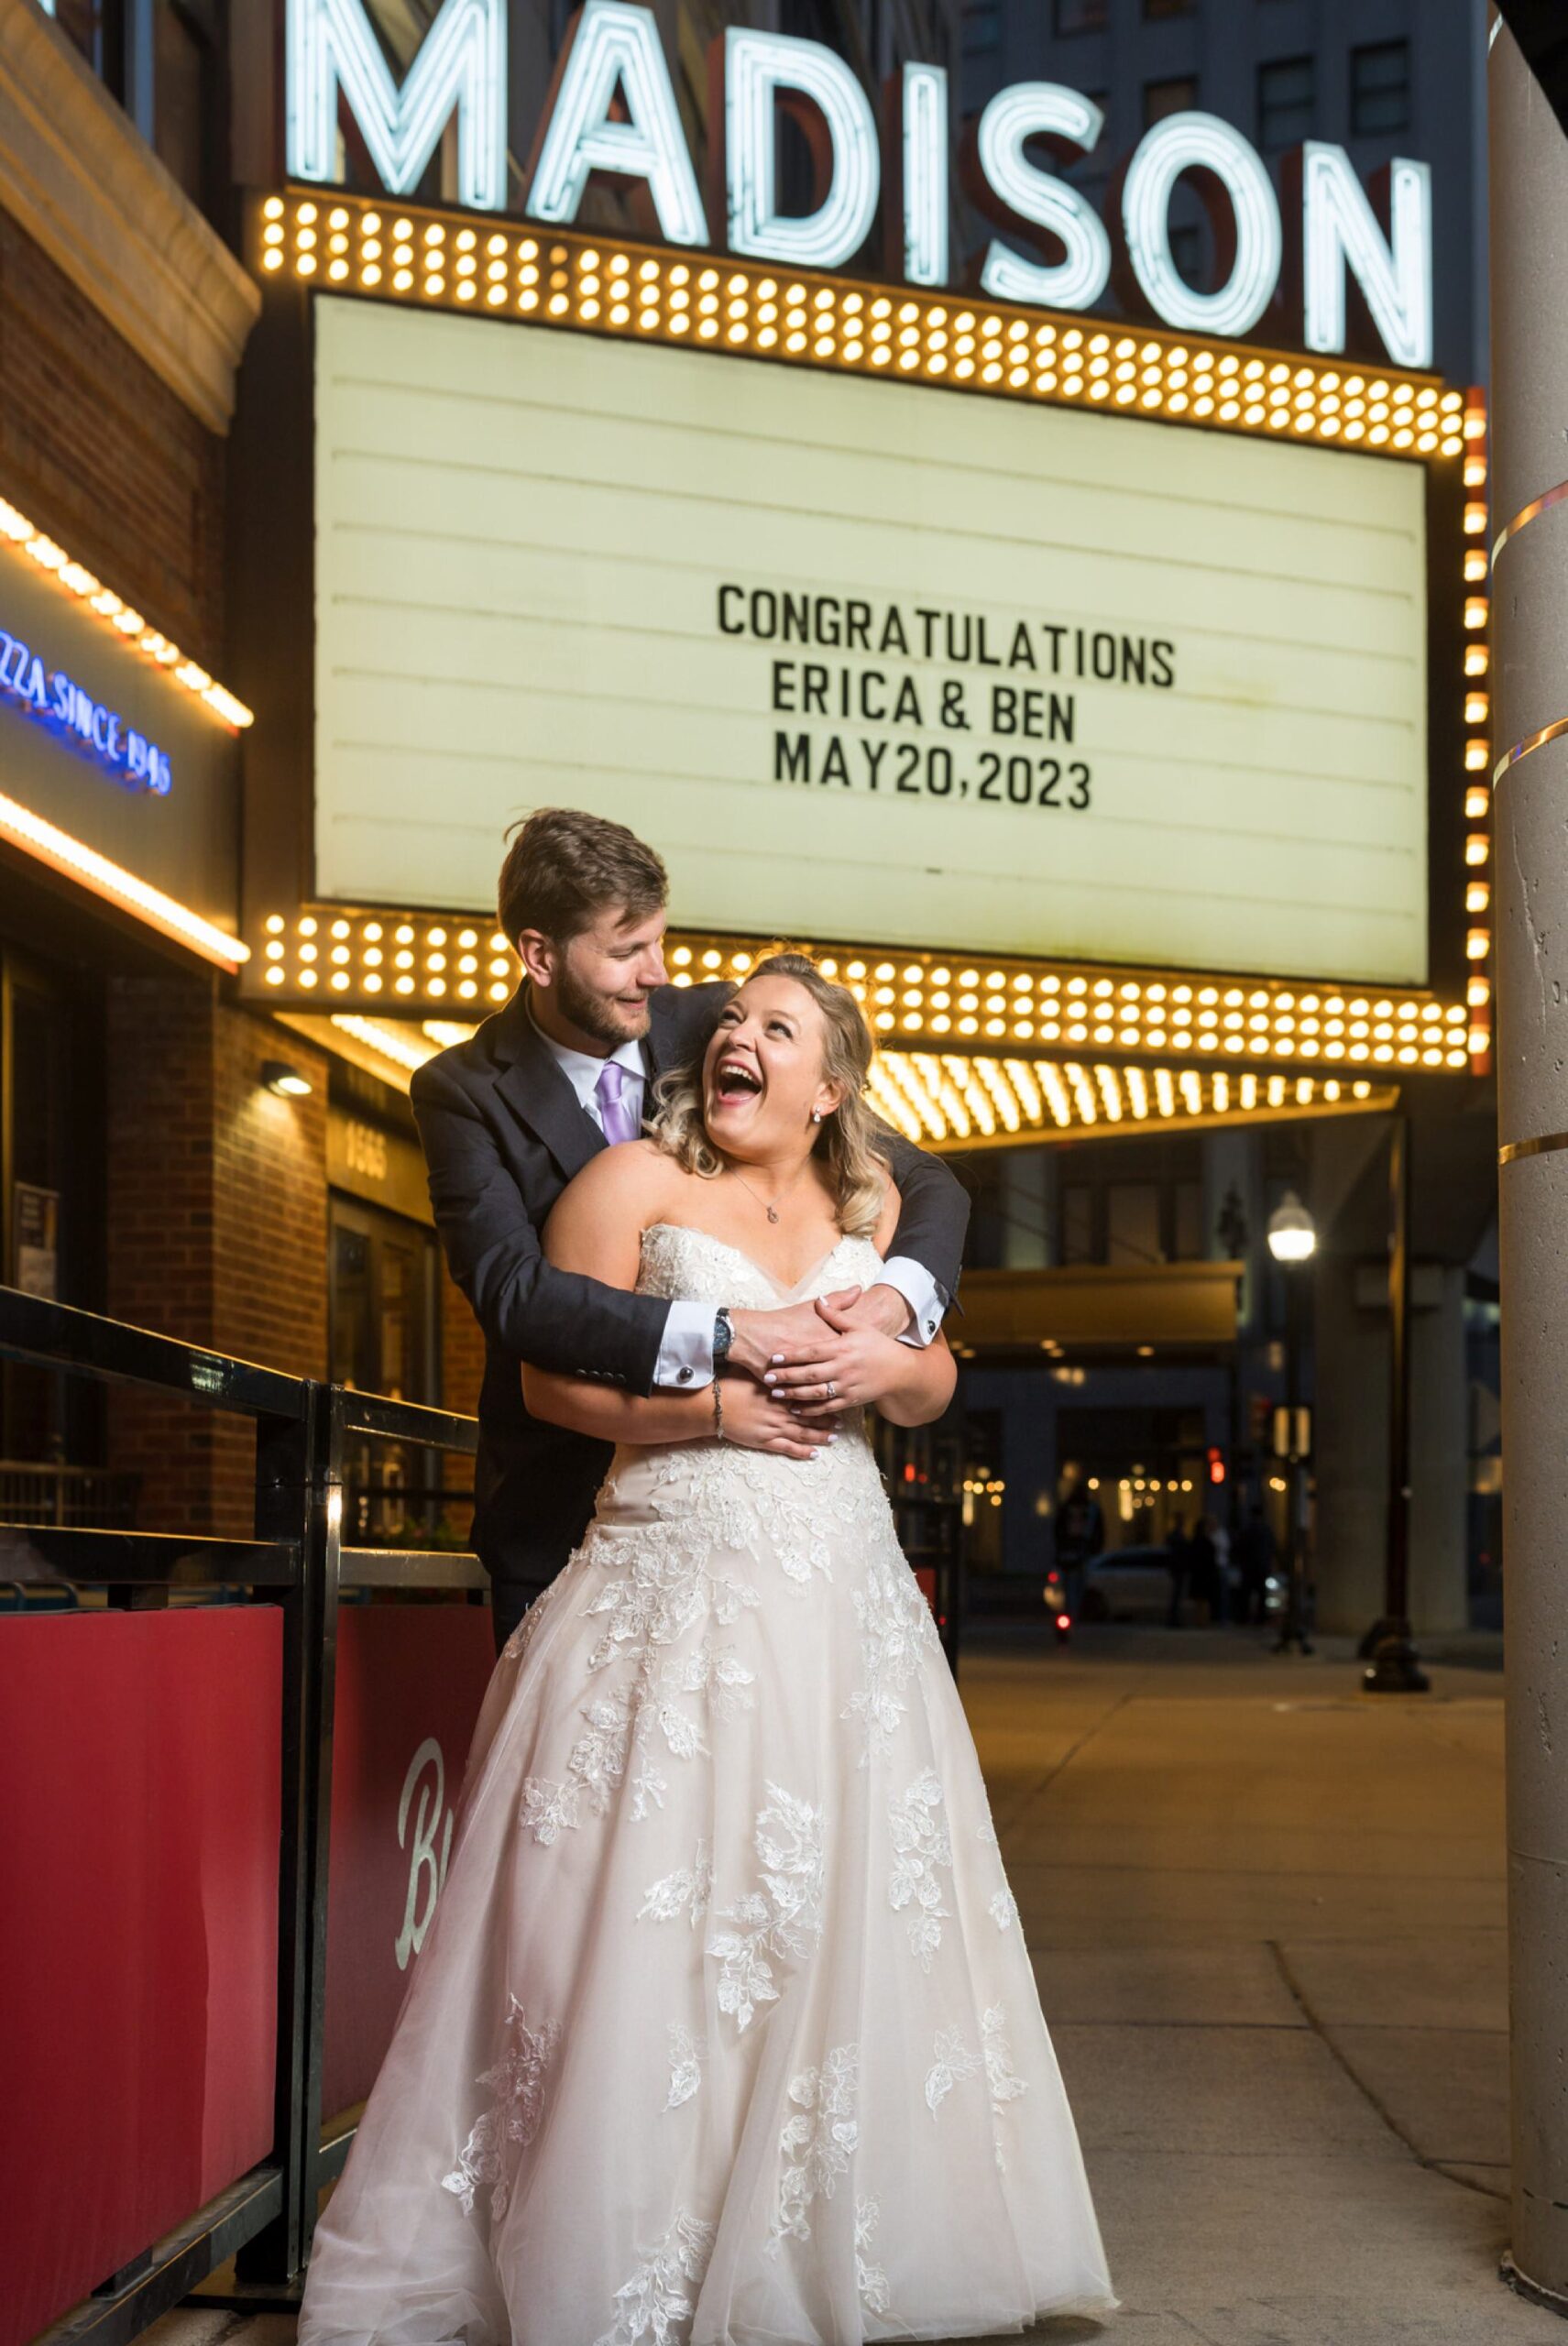 Newlyweds pose in front of marquee at Madison Building wedding.   